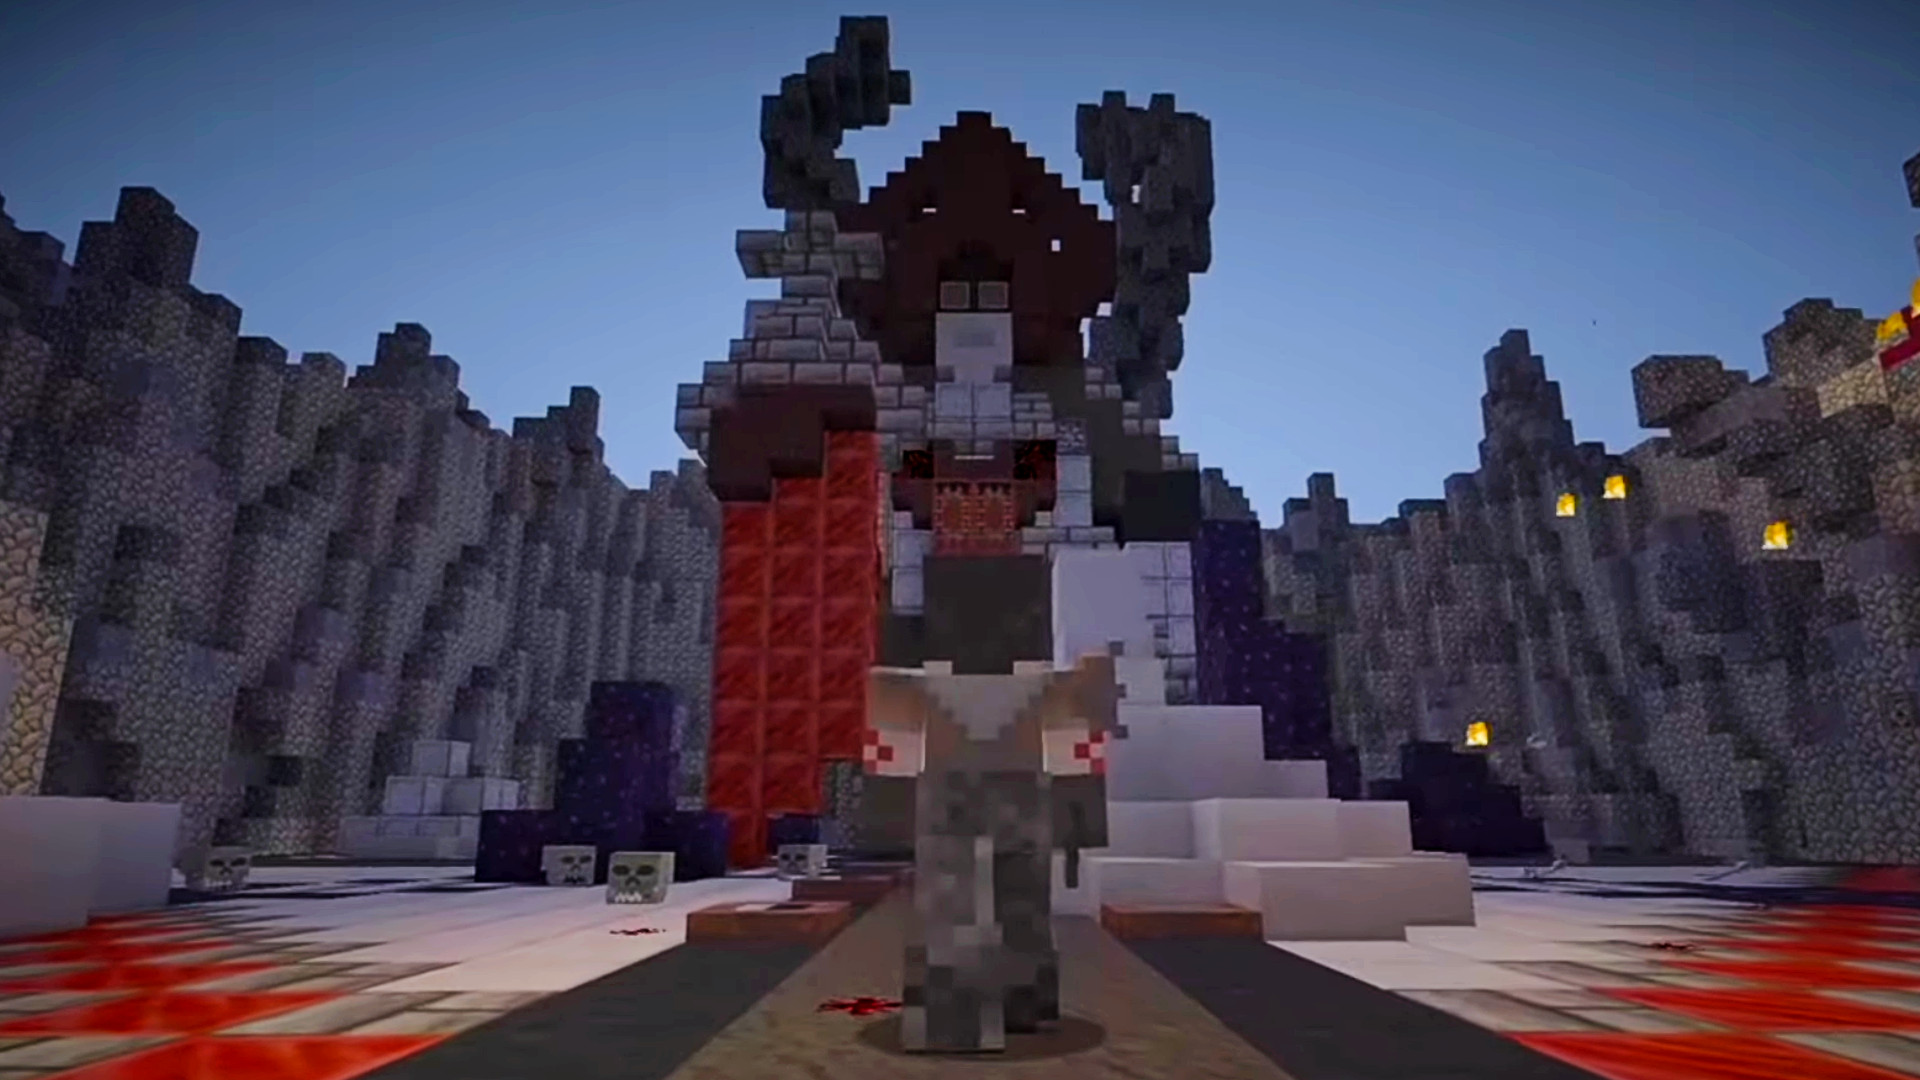 This Minecraft build is a big Dark Souls-inspired adventure